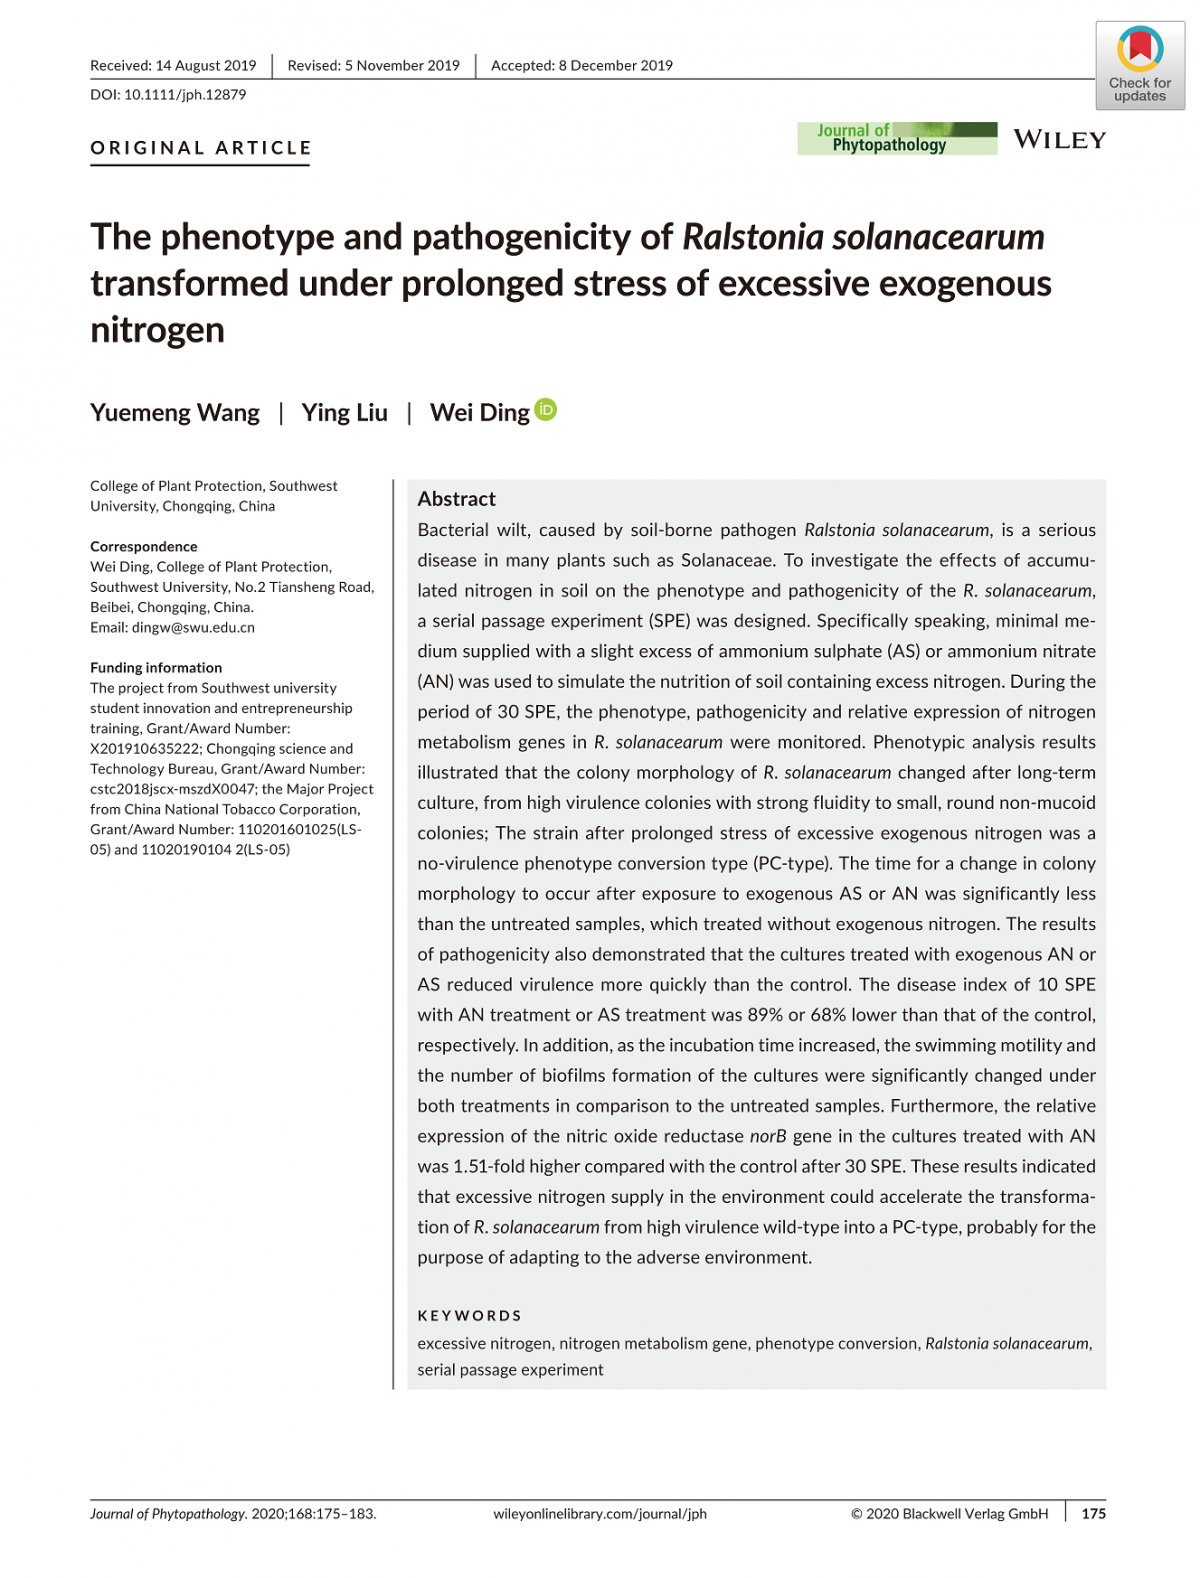 The phenotype and pathogenicity of Ralstonia solanacearum transformed under prolonged stress of excessive exogenous nitrogen